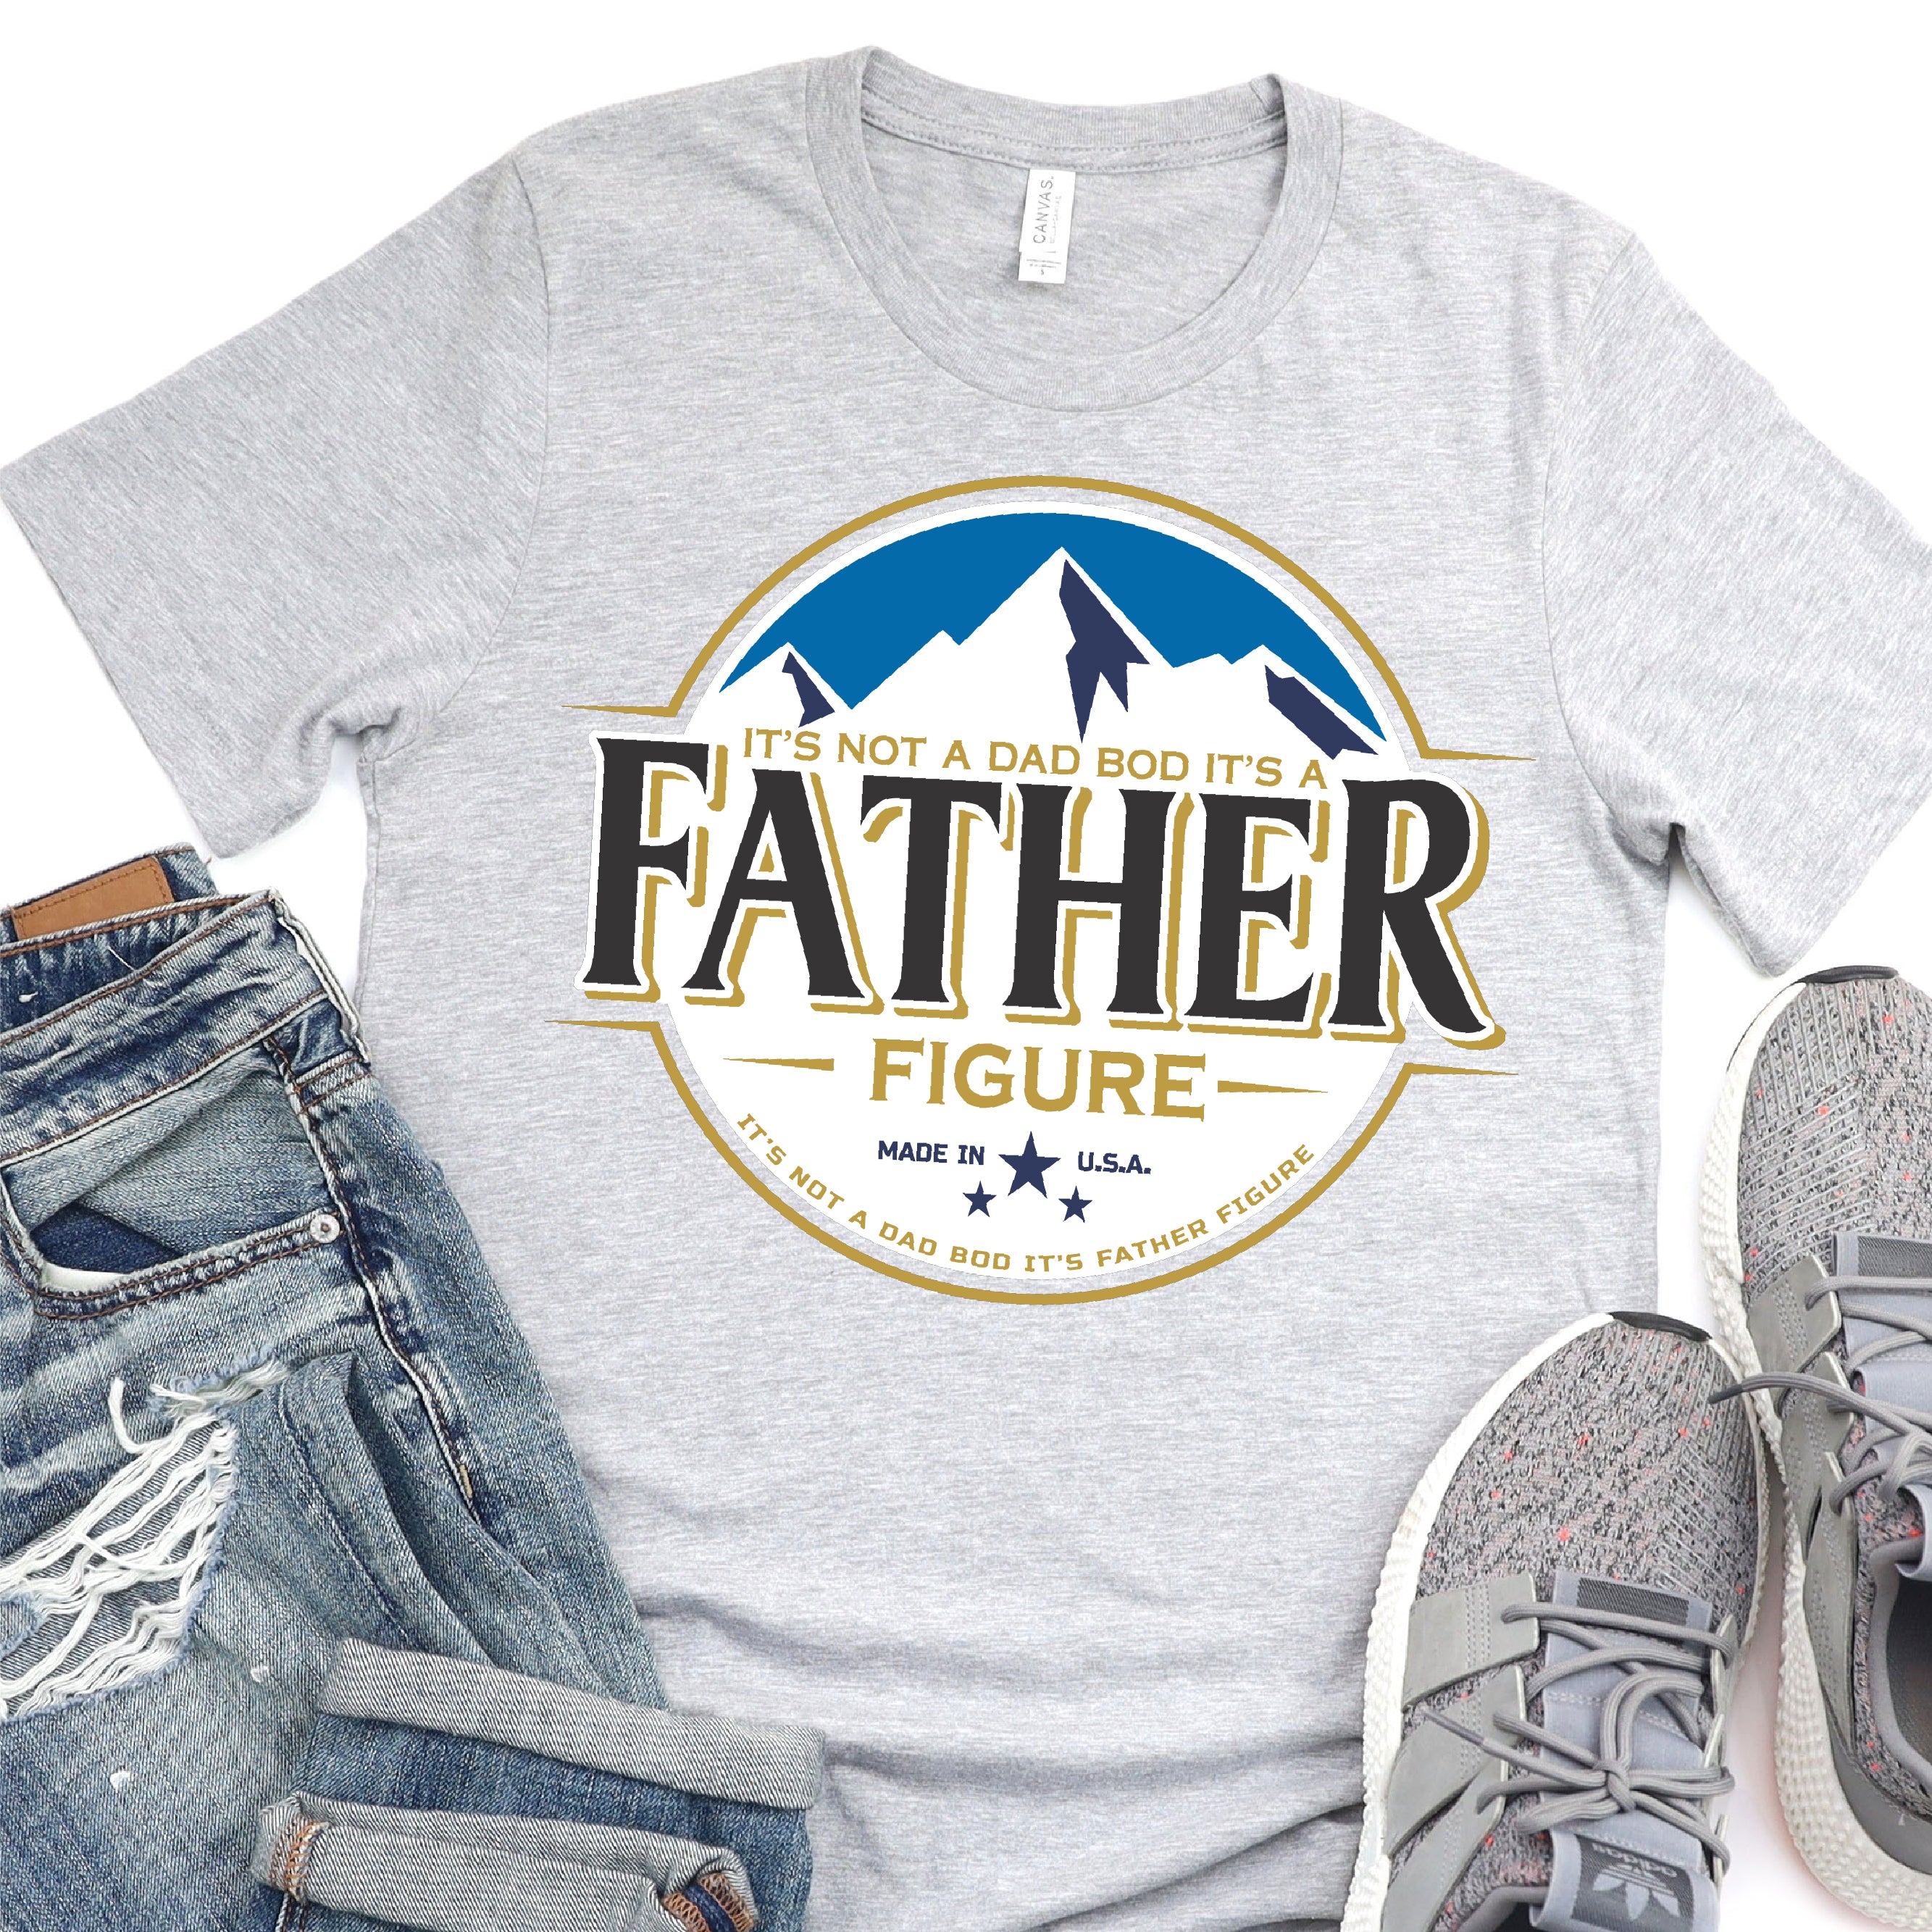 It's Not A Dad Bod, It's A Father Figure - Funny Beer - Father's Day DTF Transfer - T-shirt Transfer For Dad Nashville Design House